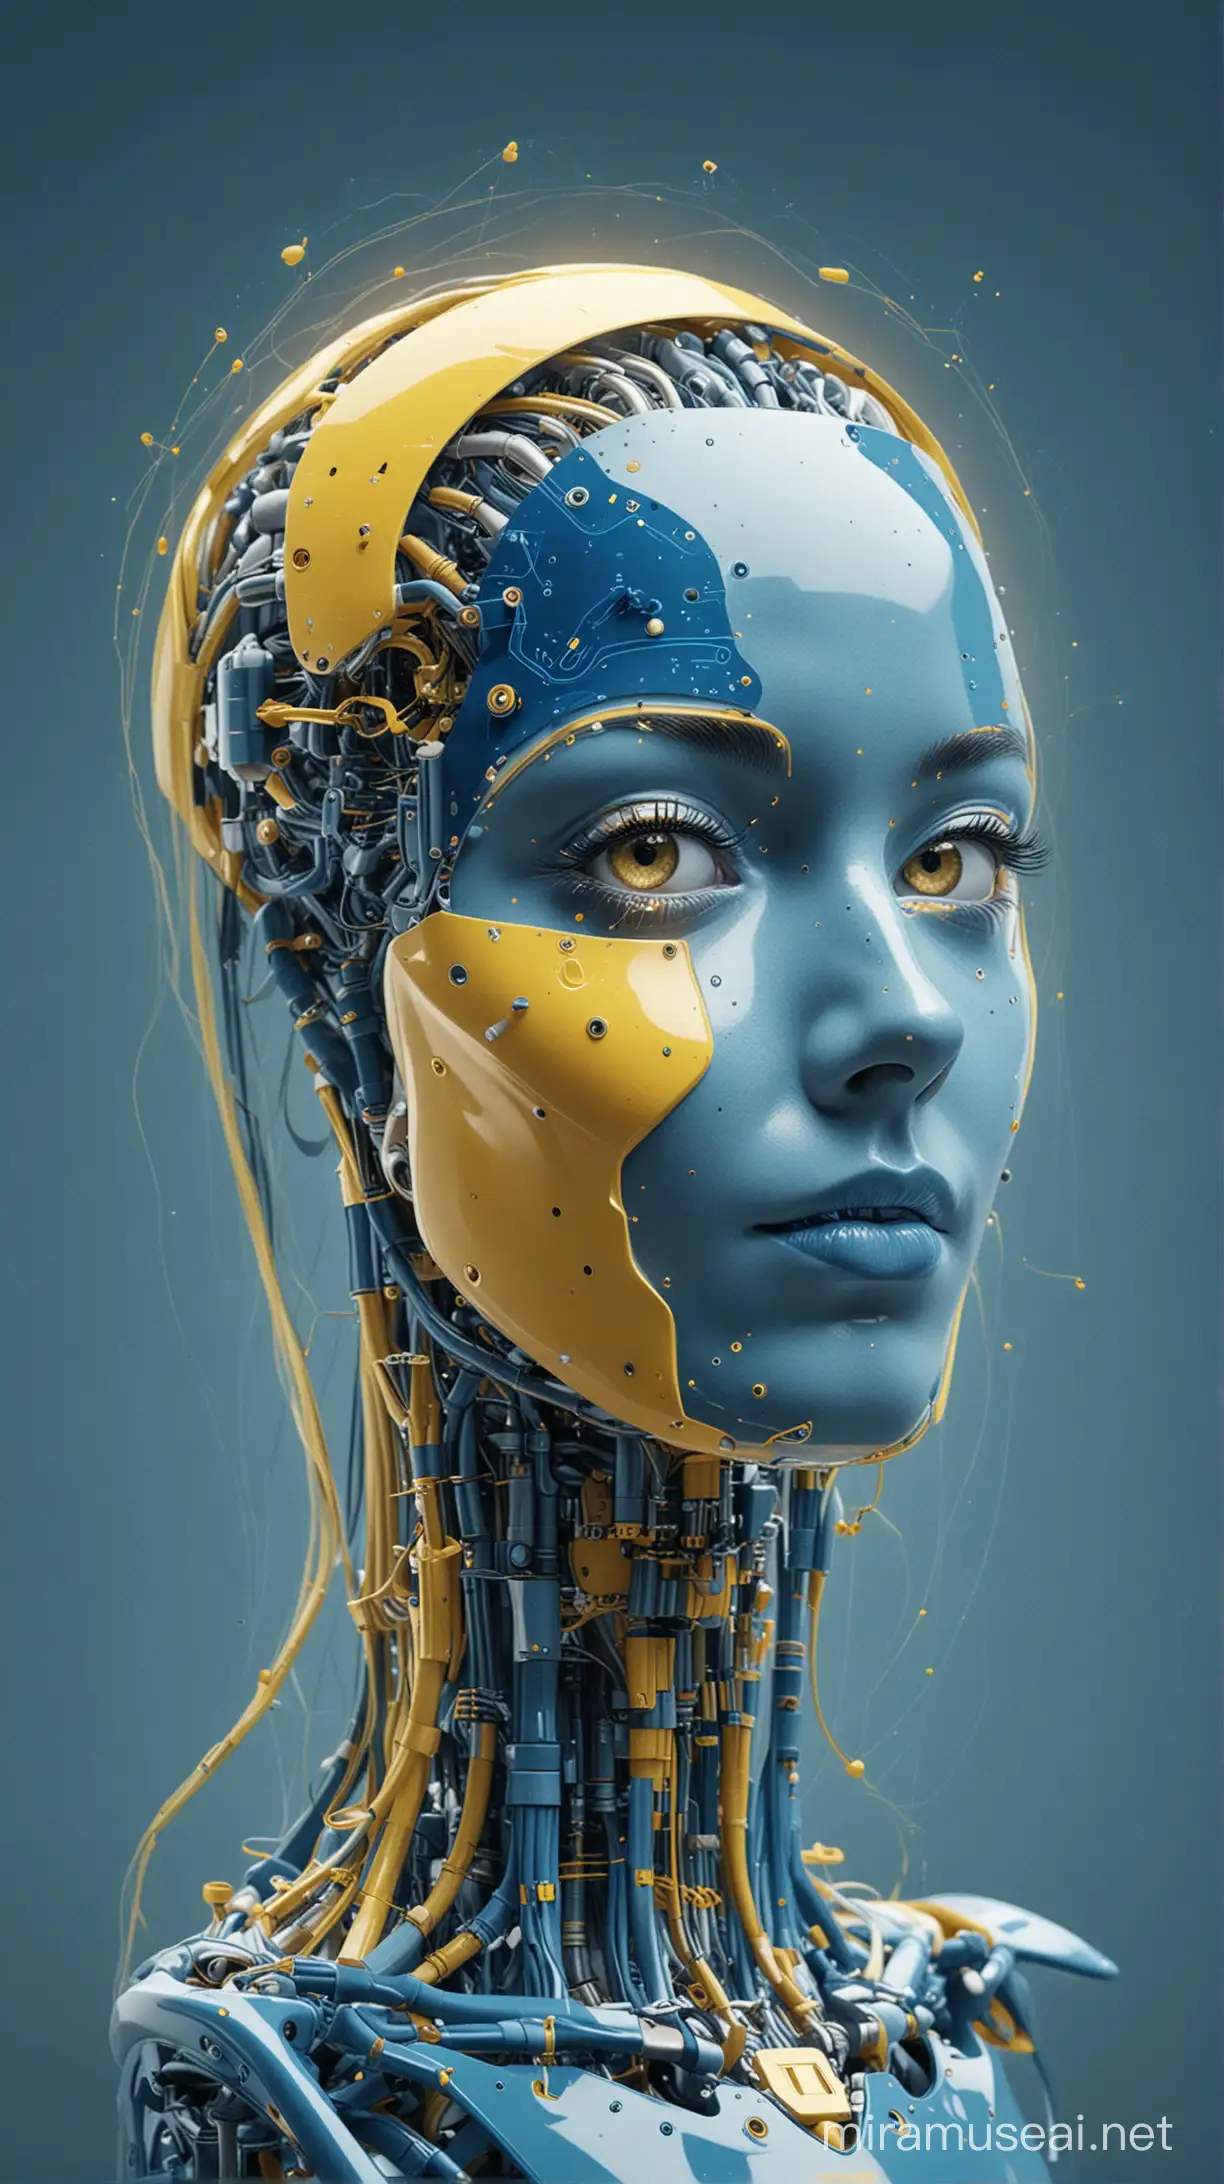 AI image for higher education using blue and yellow colors
